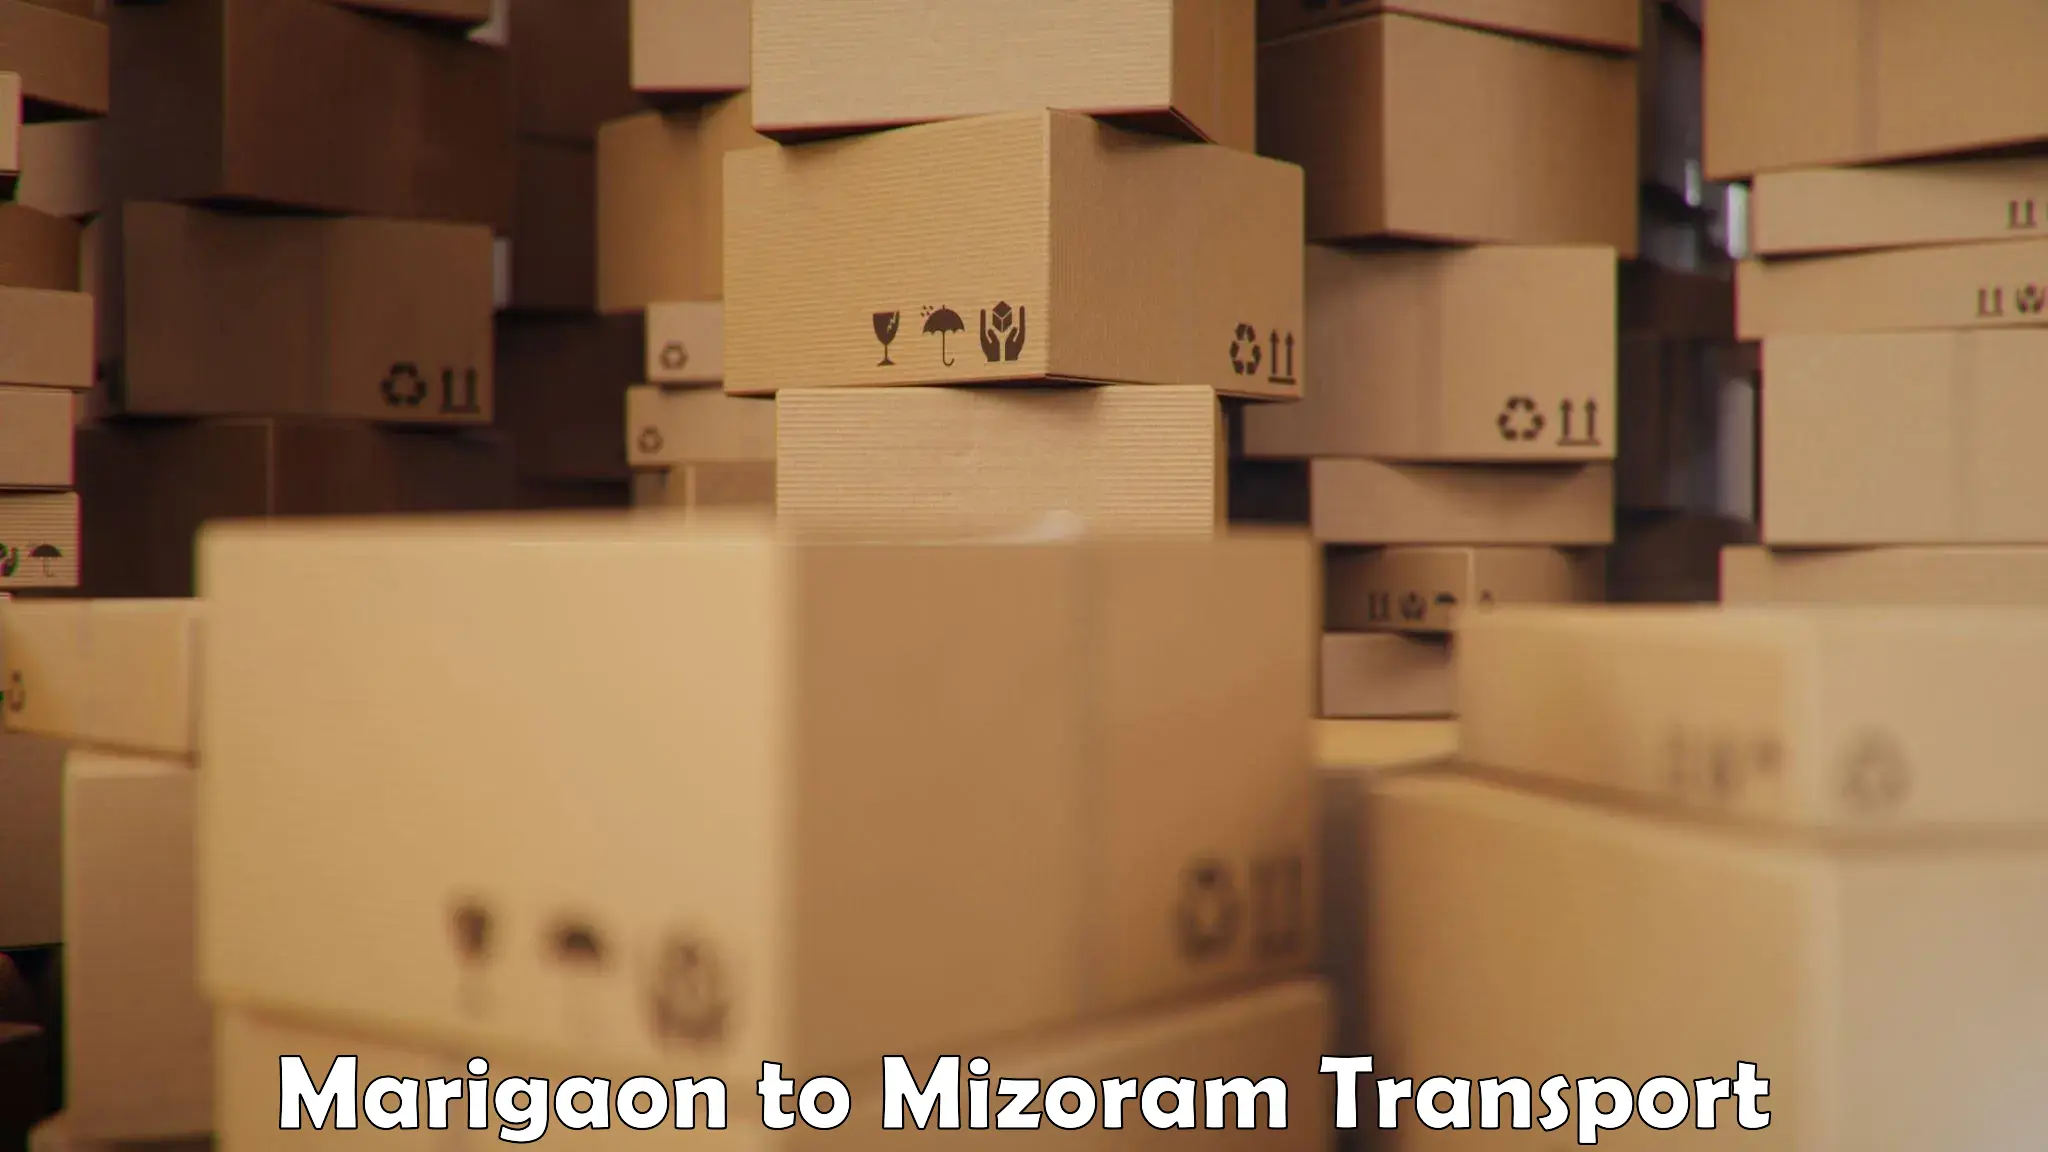 Transport bike from one state to another Marigaon to Mizoram